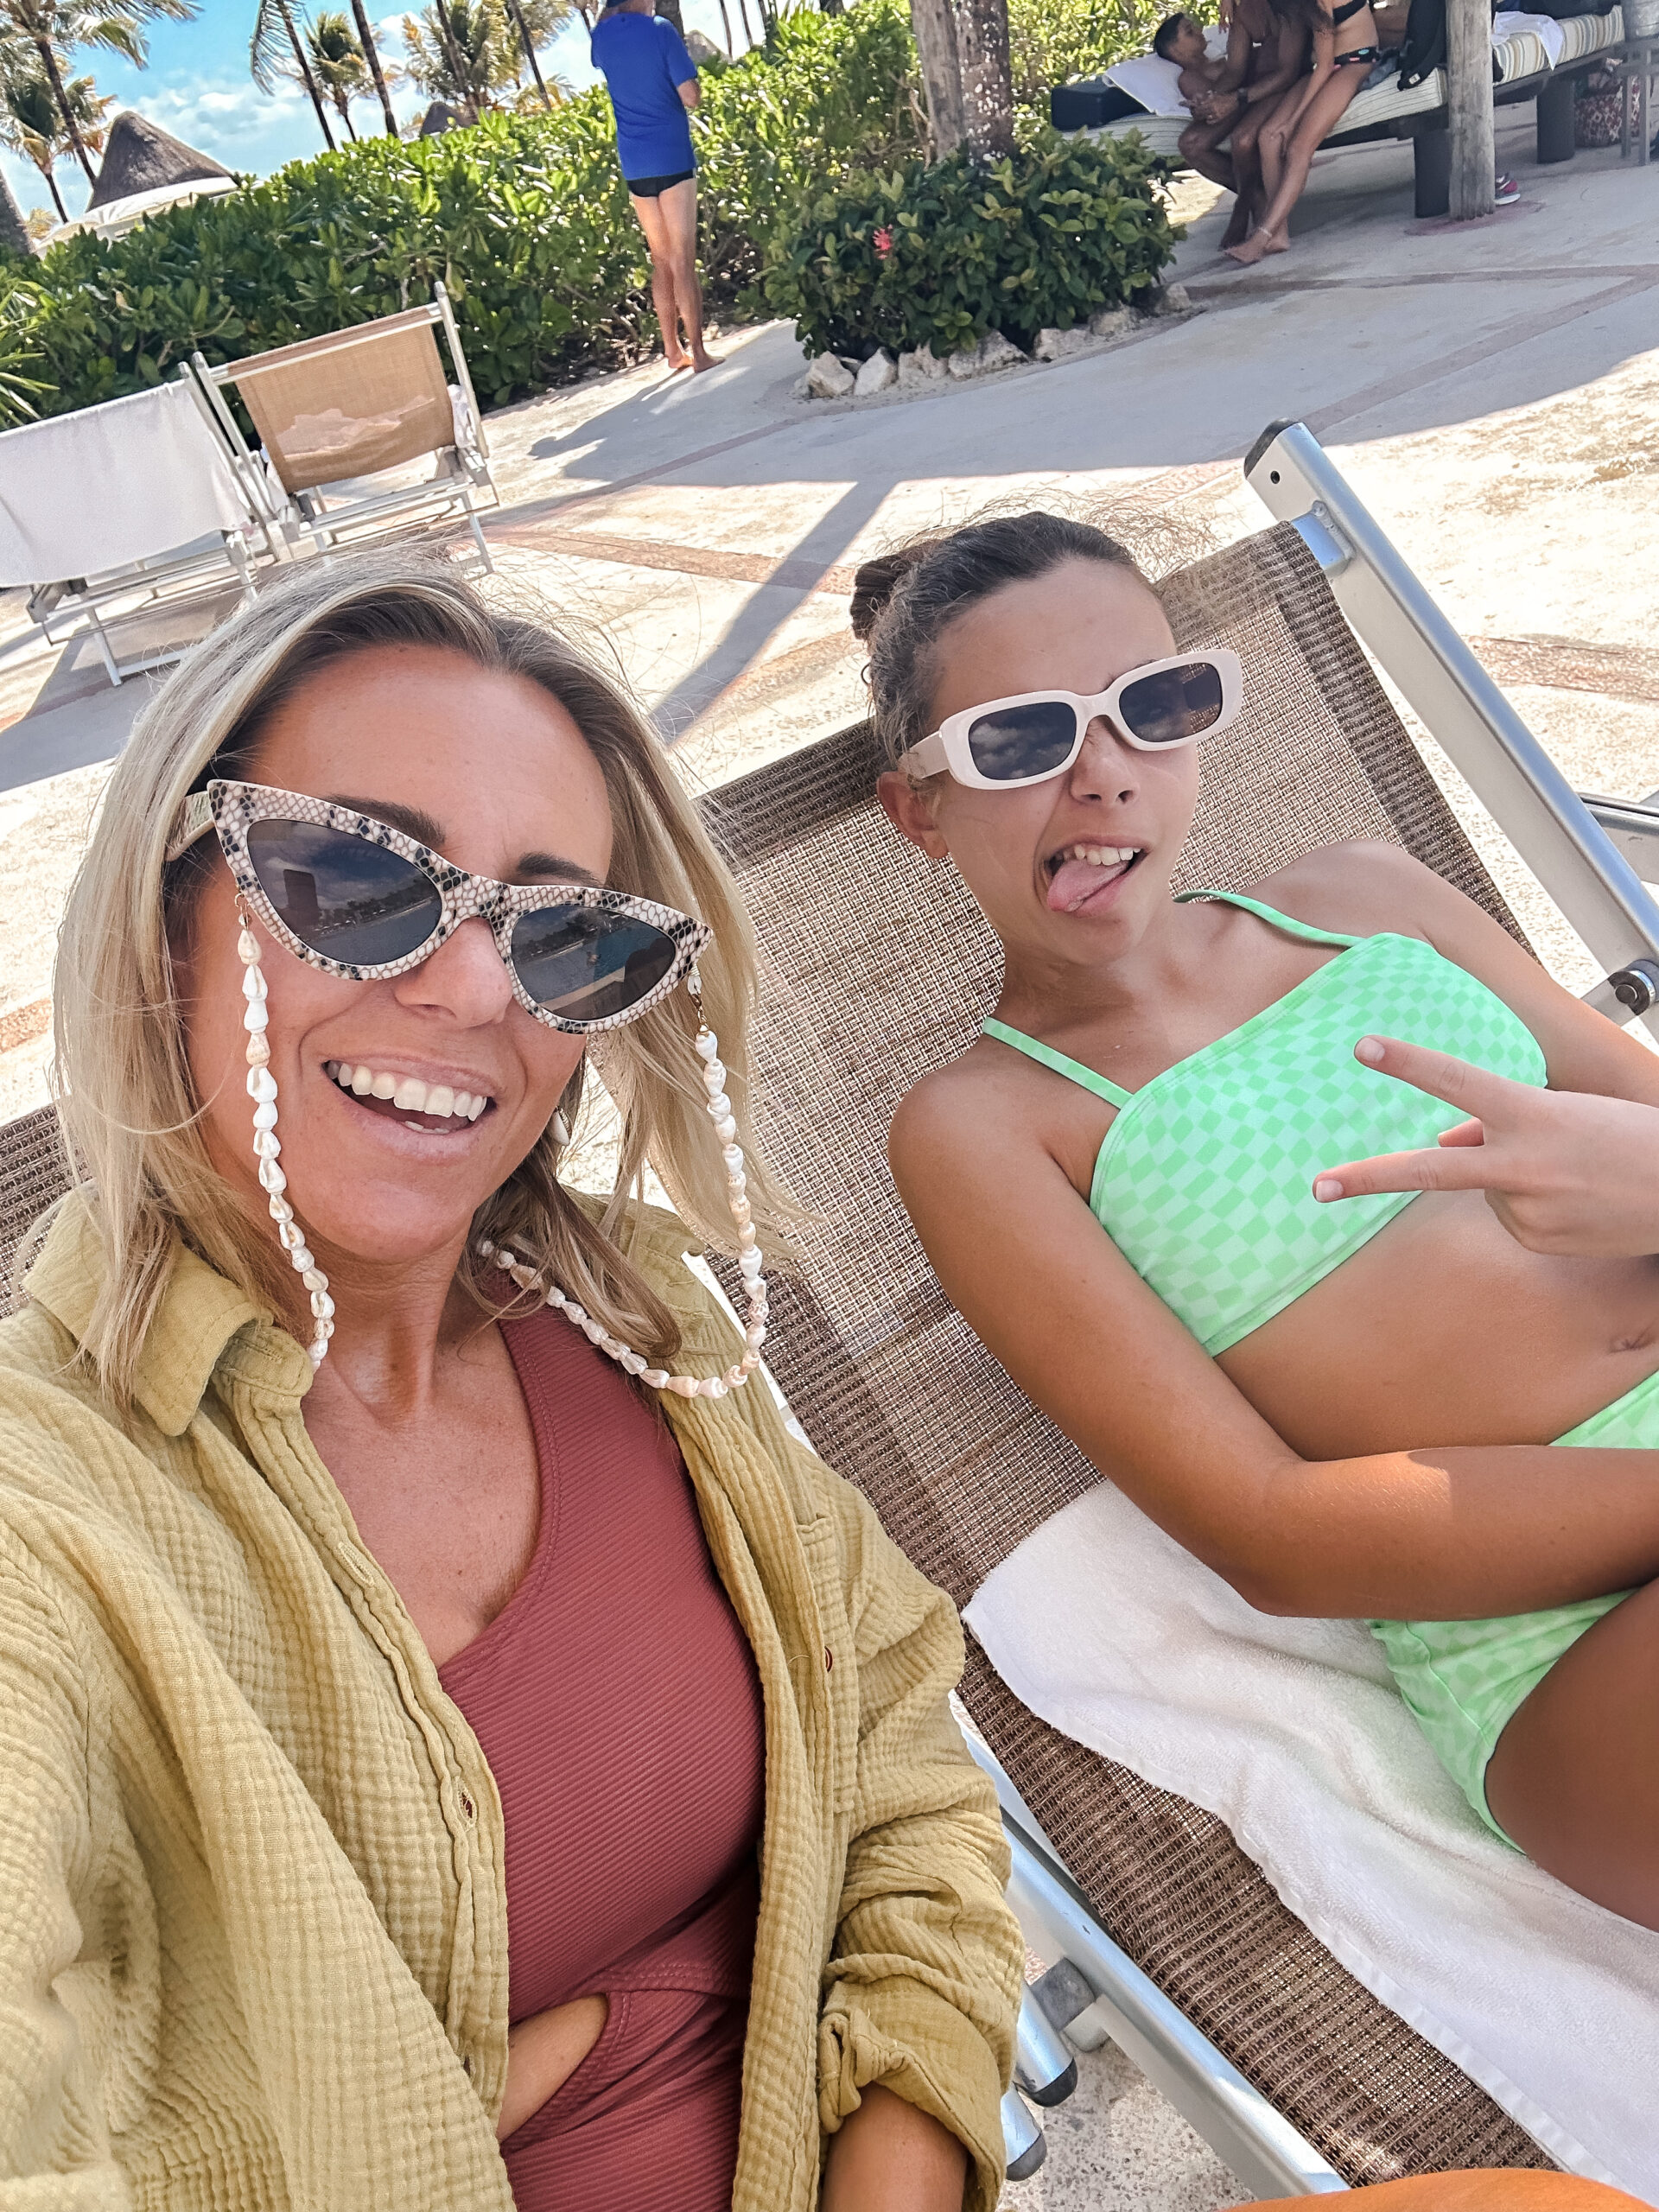 OUR TRIP TO THE RIVIERA MAYA-Jaclyn de Leon style. A recap of our Riviera Maya vacation with the whole family. Where we stayed, fun activities and tips for travel.